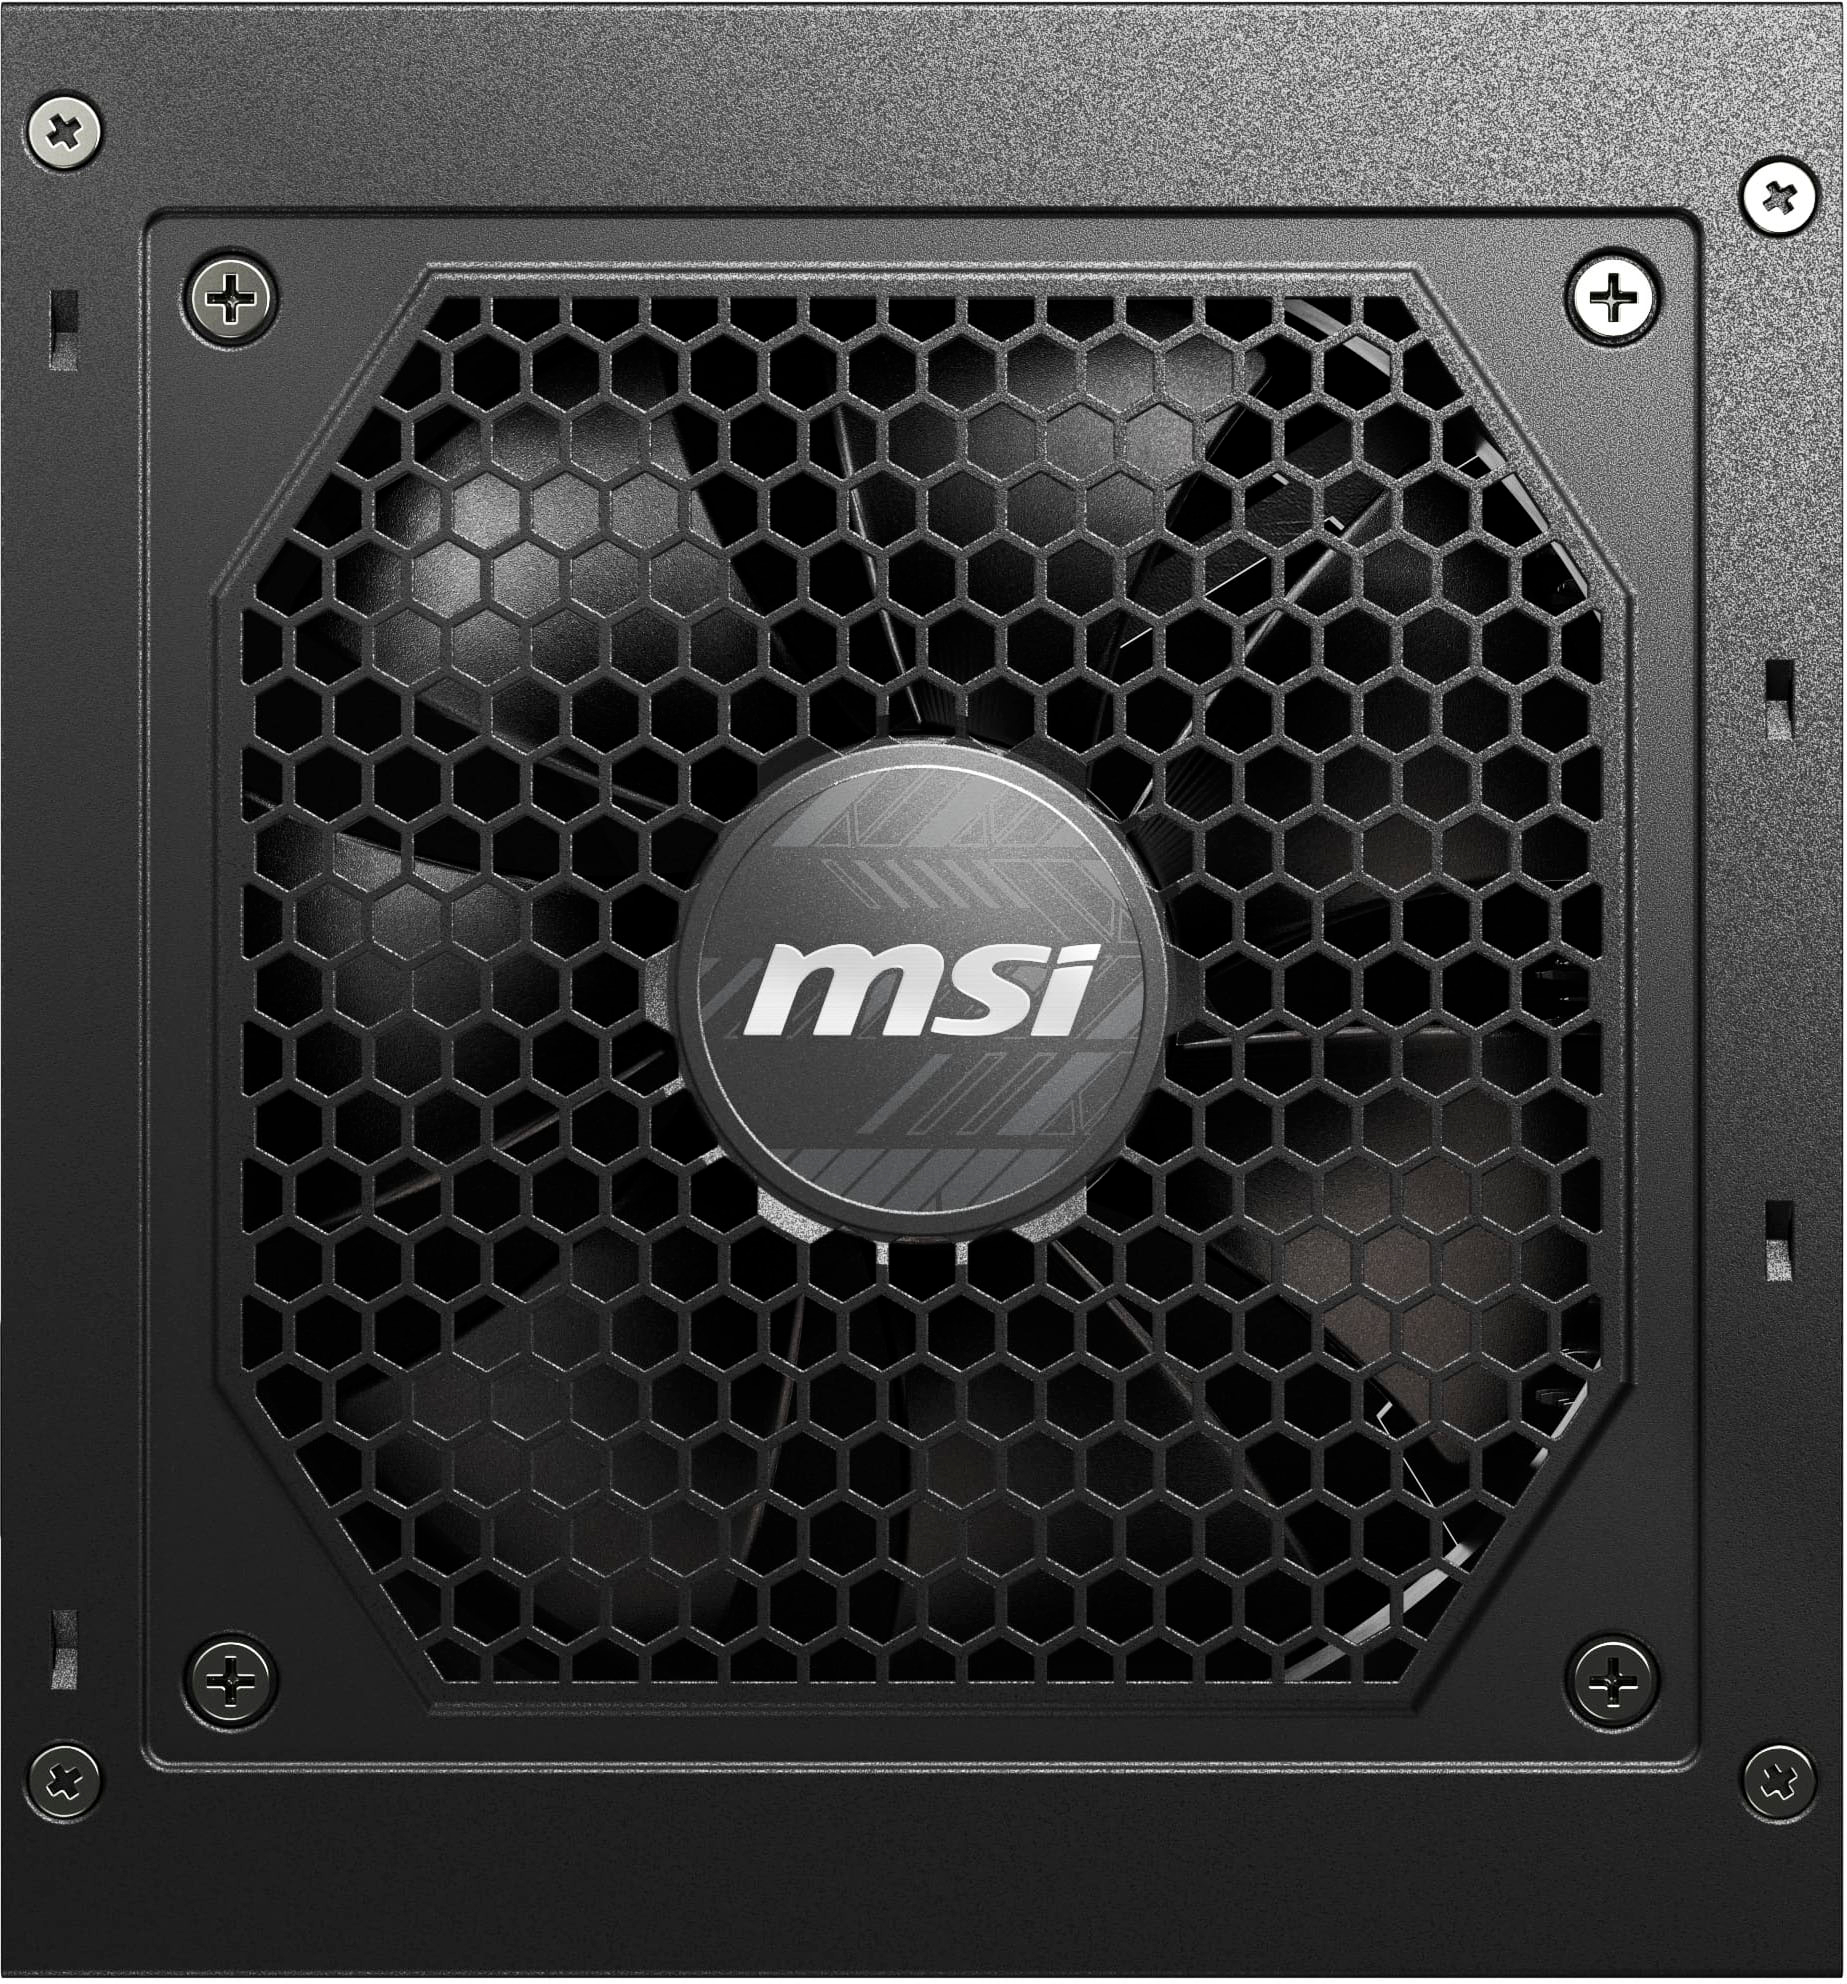 MSI - MAG A750GL PCIE 5.0, 80 GOLD Fully Modular Gaming PSU, 12VHPWR Cable,  ATX 3.0 Compatible, 750W Power Supply 